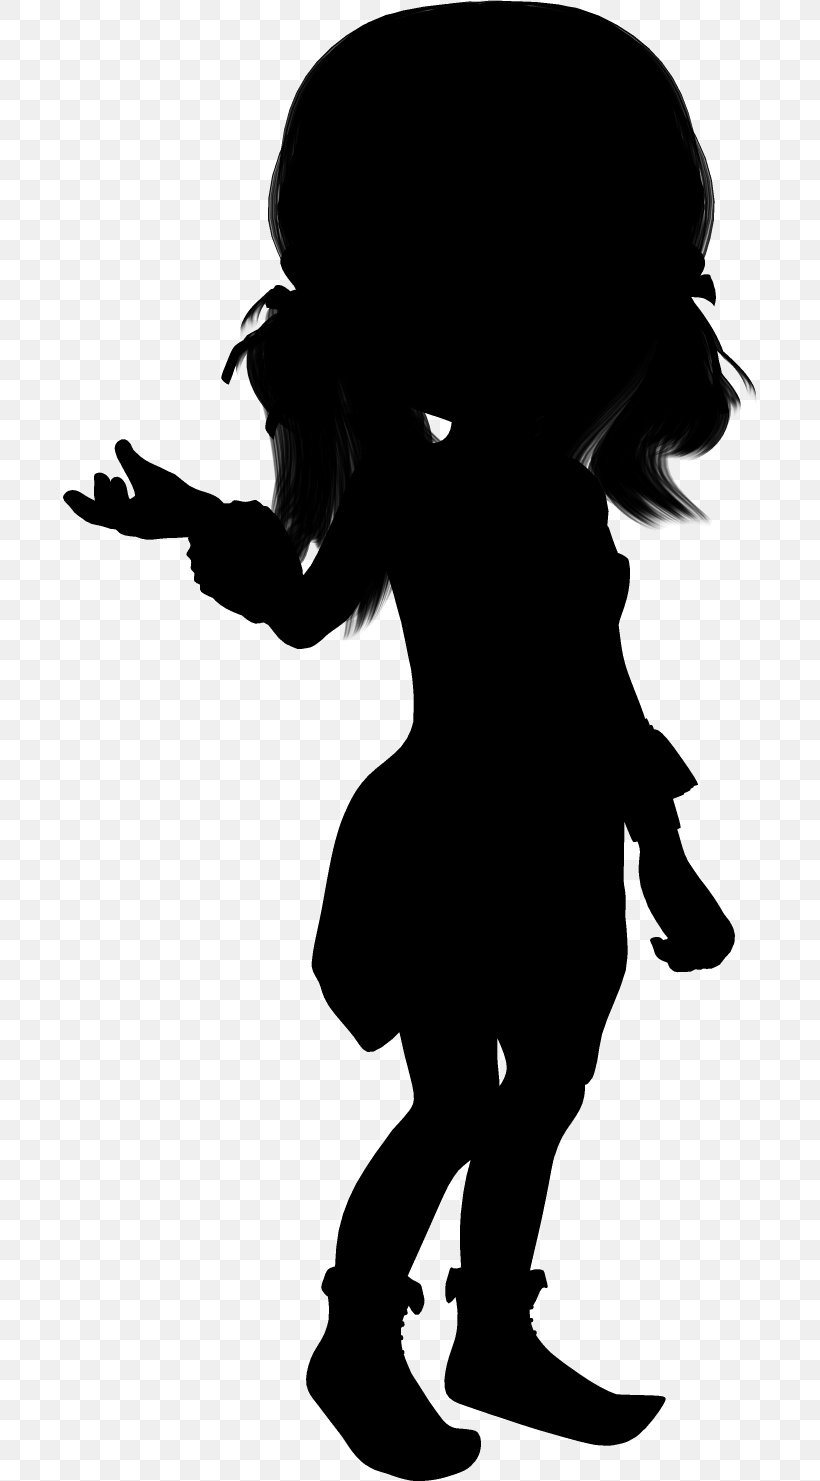 Silhouette Clip Art Illustration Image Stock.xchng, PNG, 694x1481px, Silhouette, Art, Black Hair, Blackandwhite, Cartoon Download Free